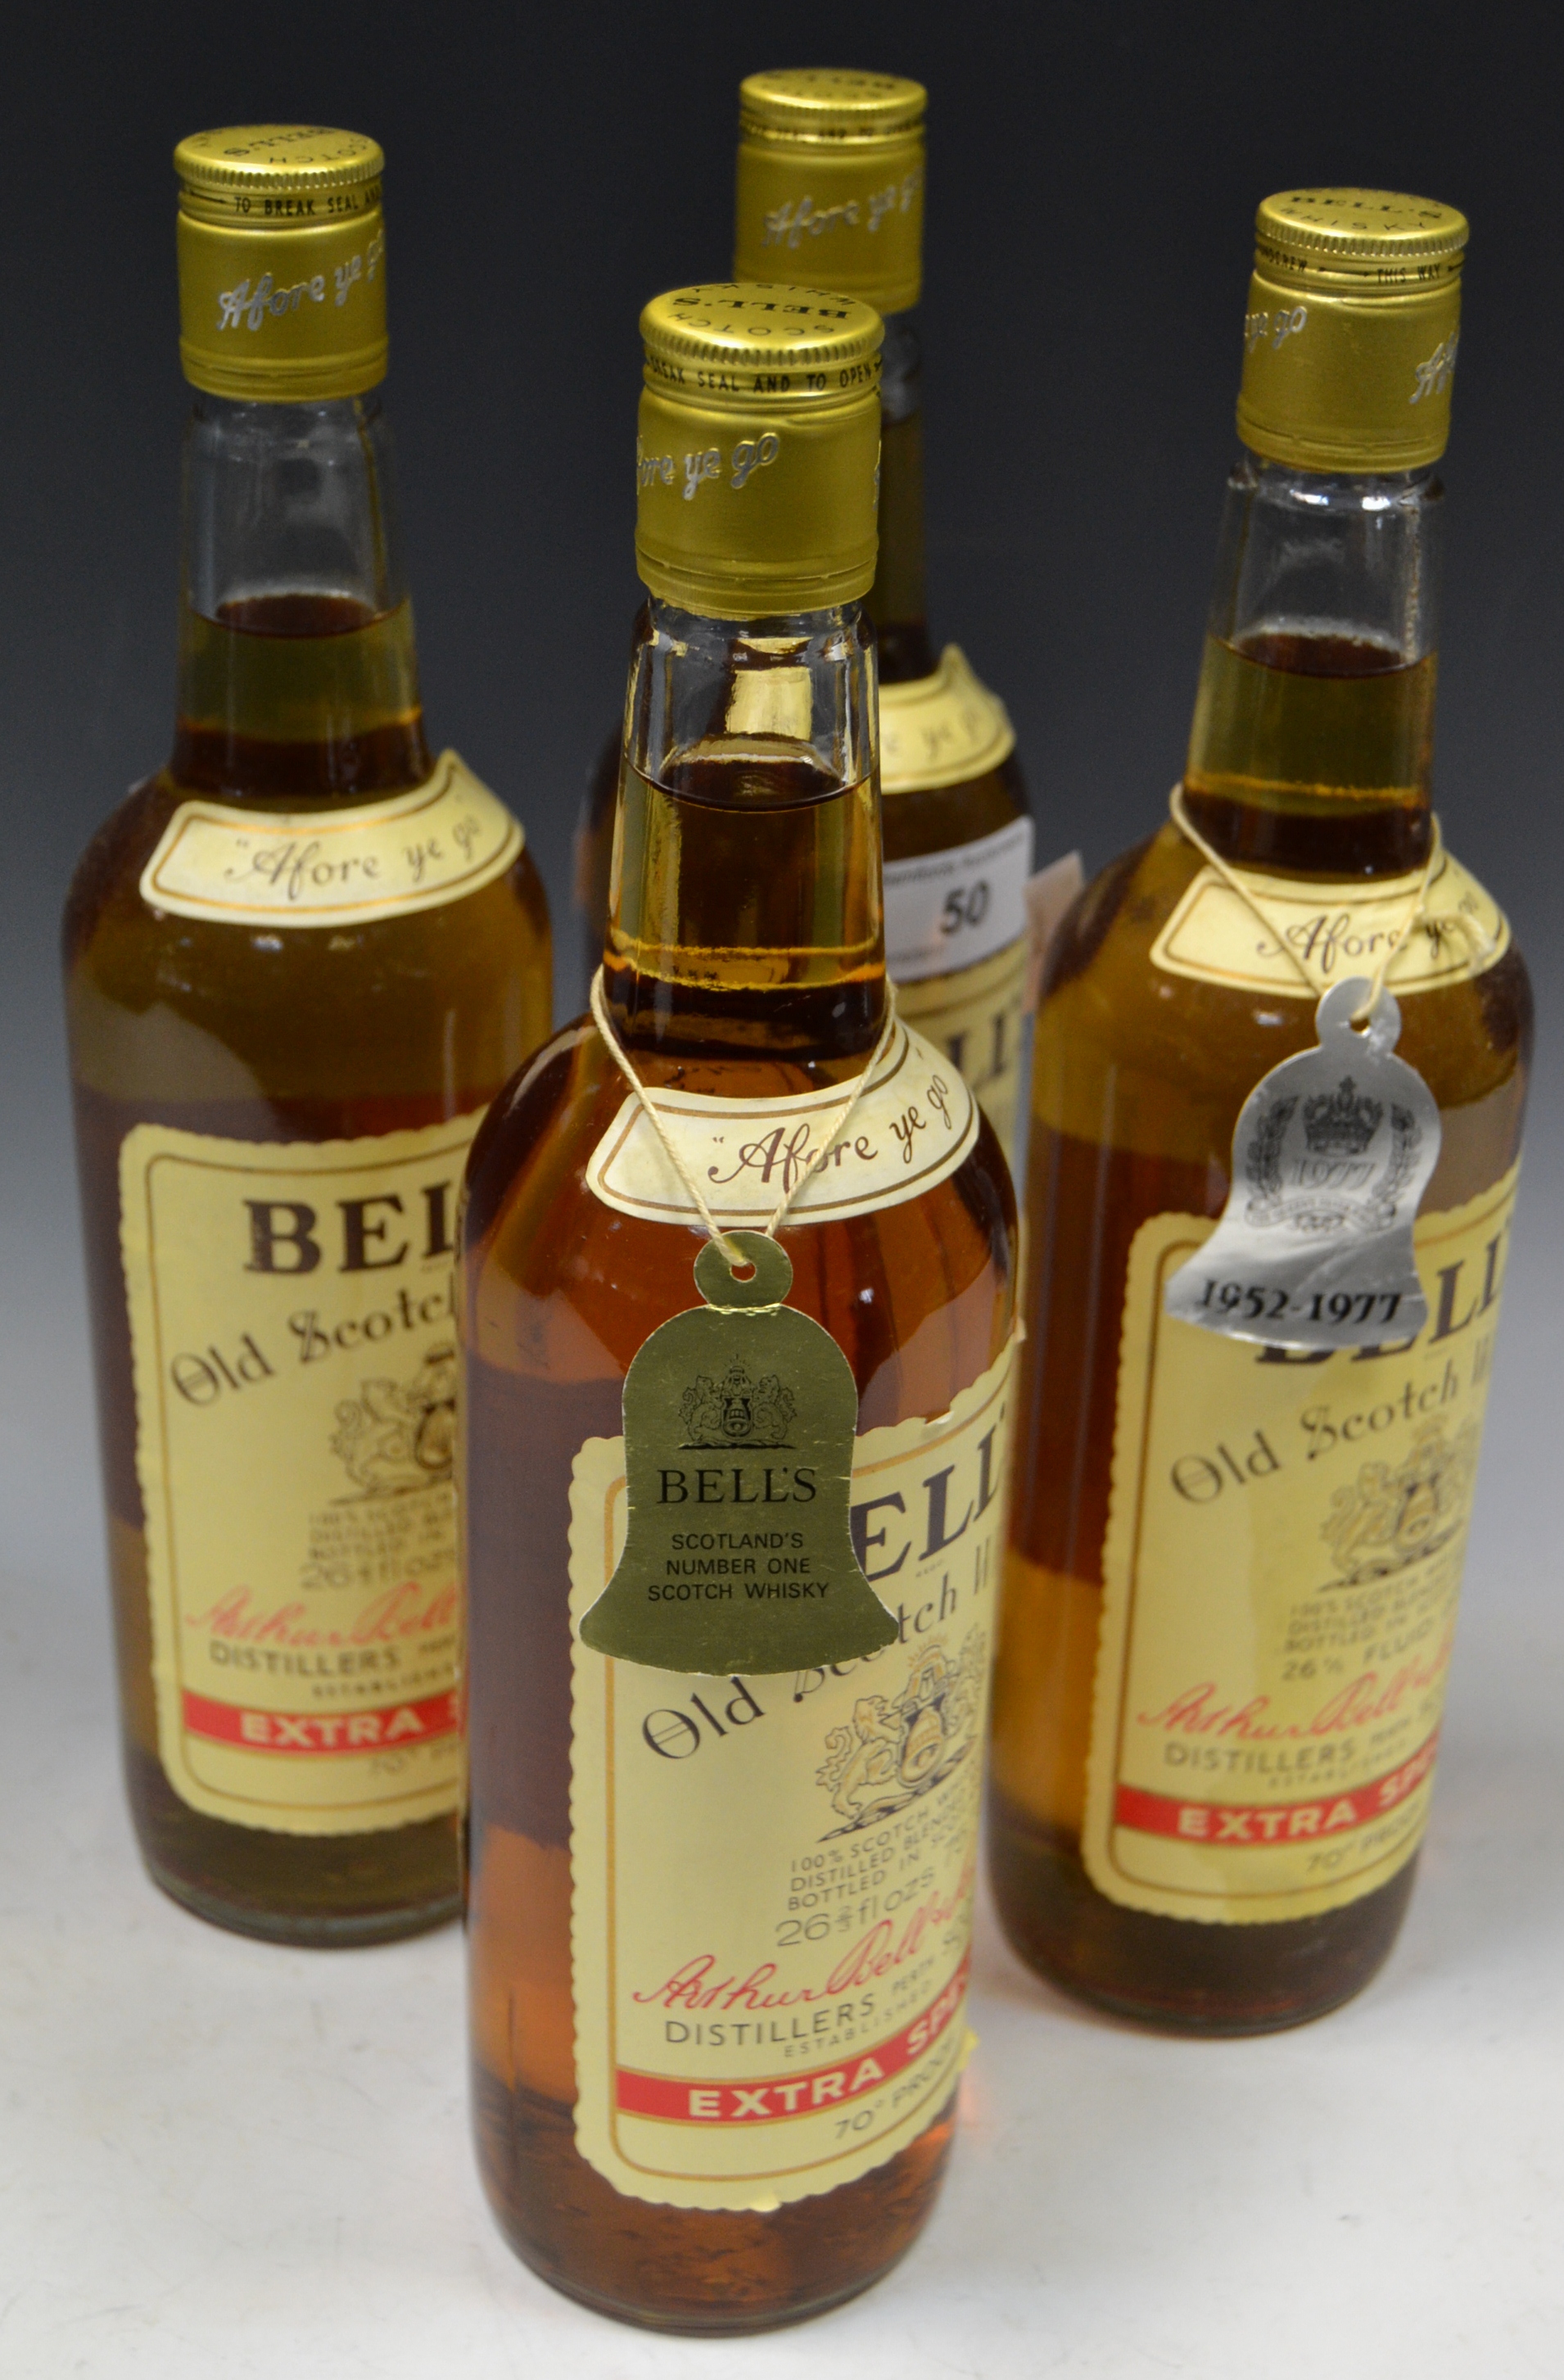 Whisky - three bottles of Bells Old Scotch Whisky, extra special, 26fl oz,